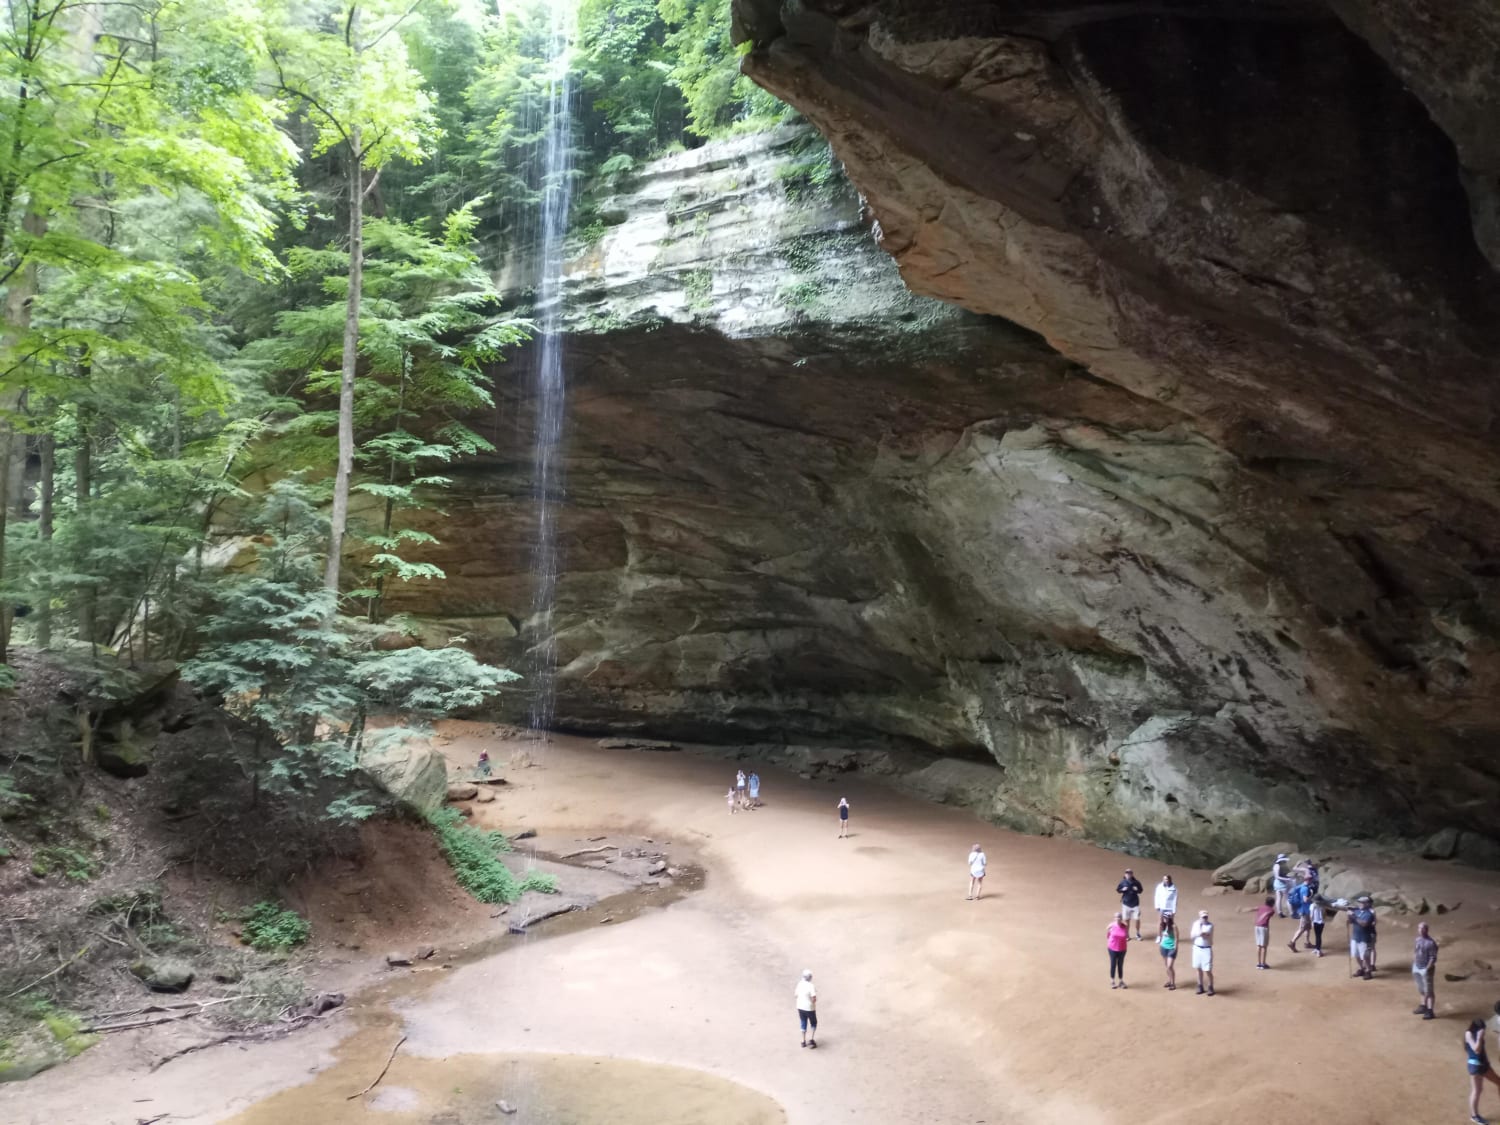 Finally got one! I present Ash Cave in Hockong Hills Ohio. Pictures do it NO justice at all!